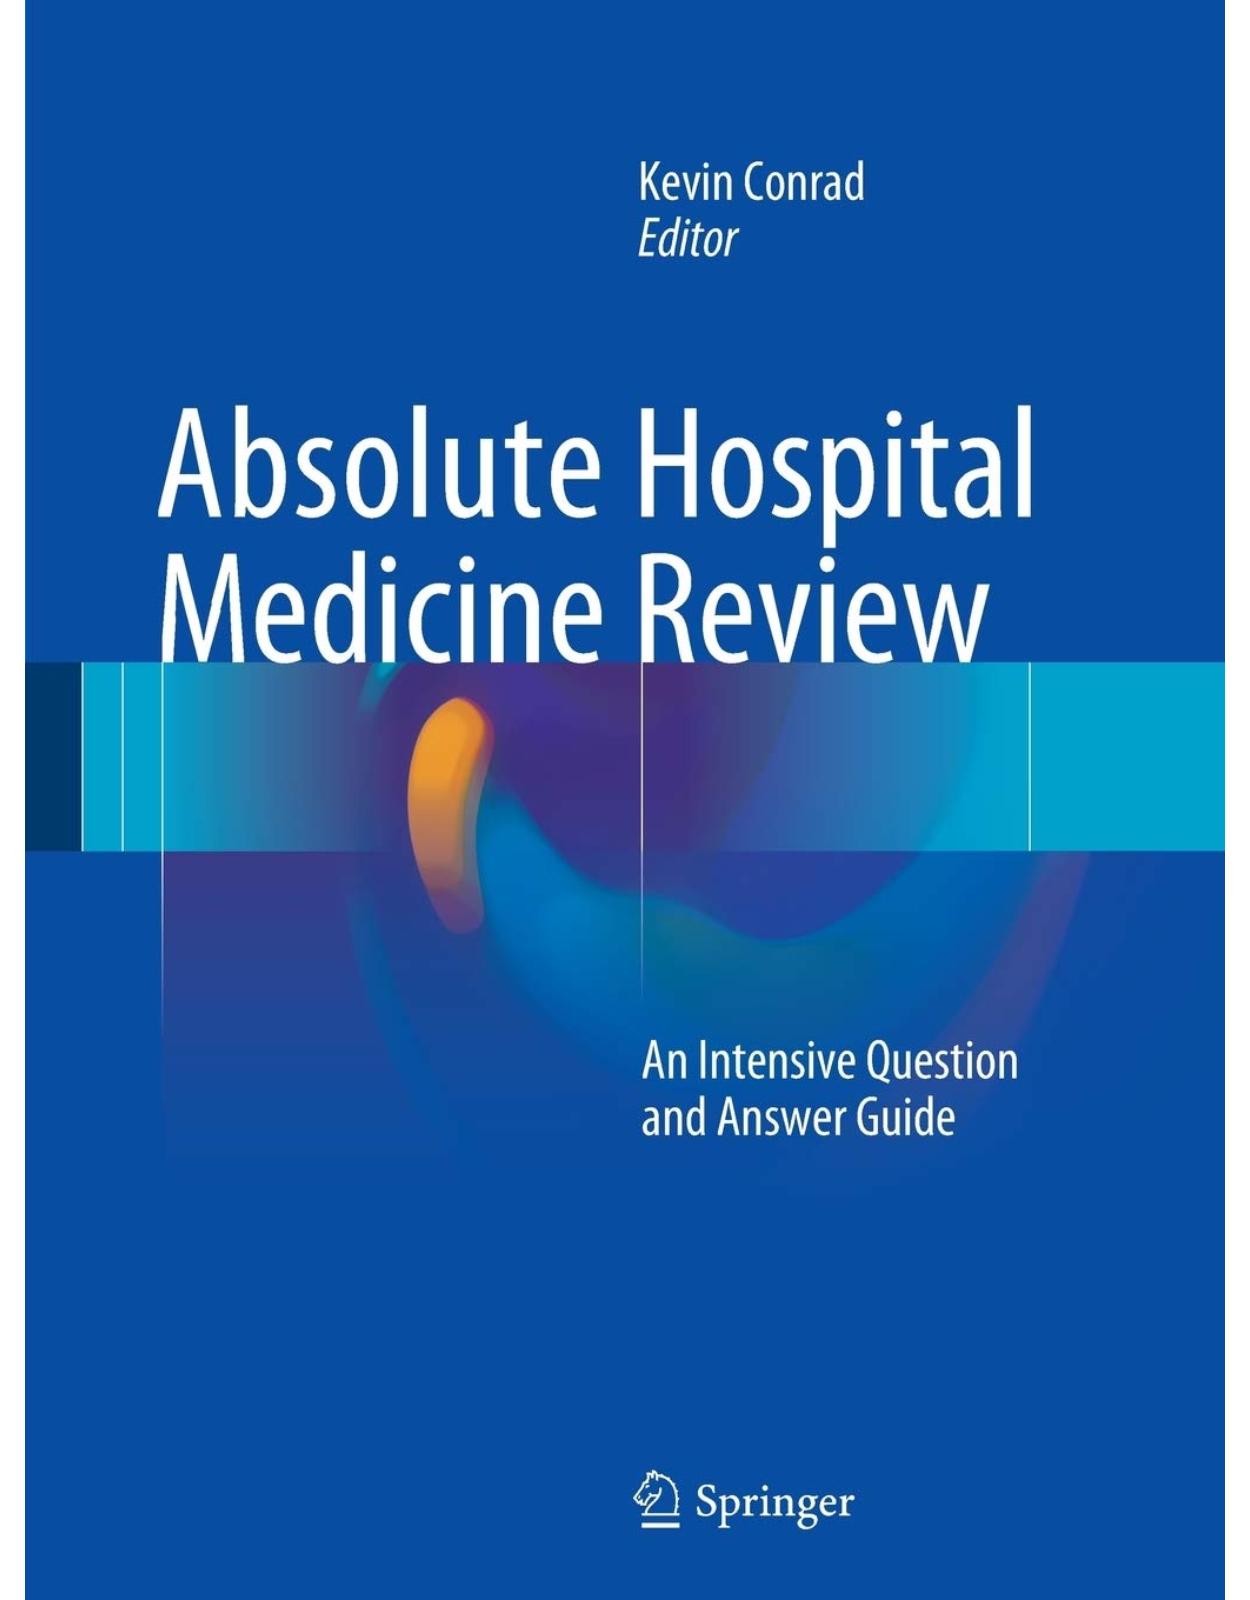 Absolute Hospital Medicine Review